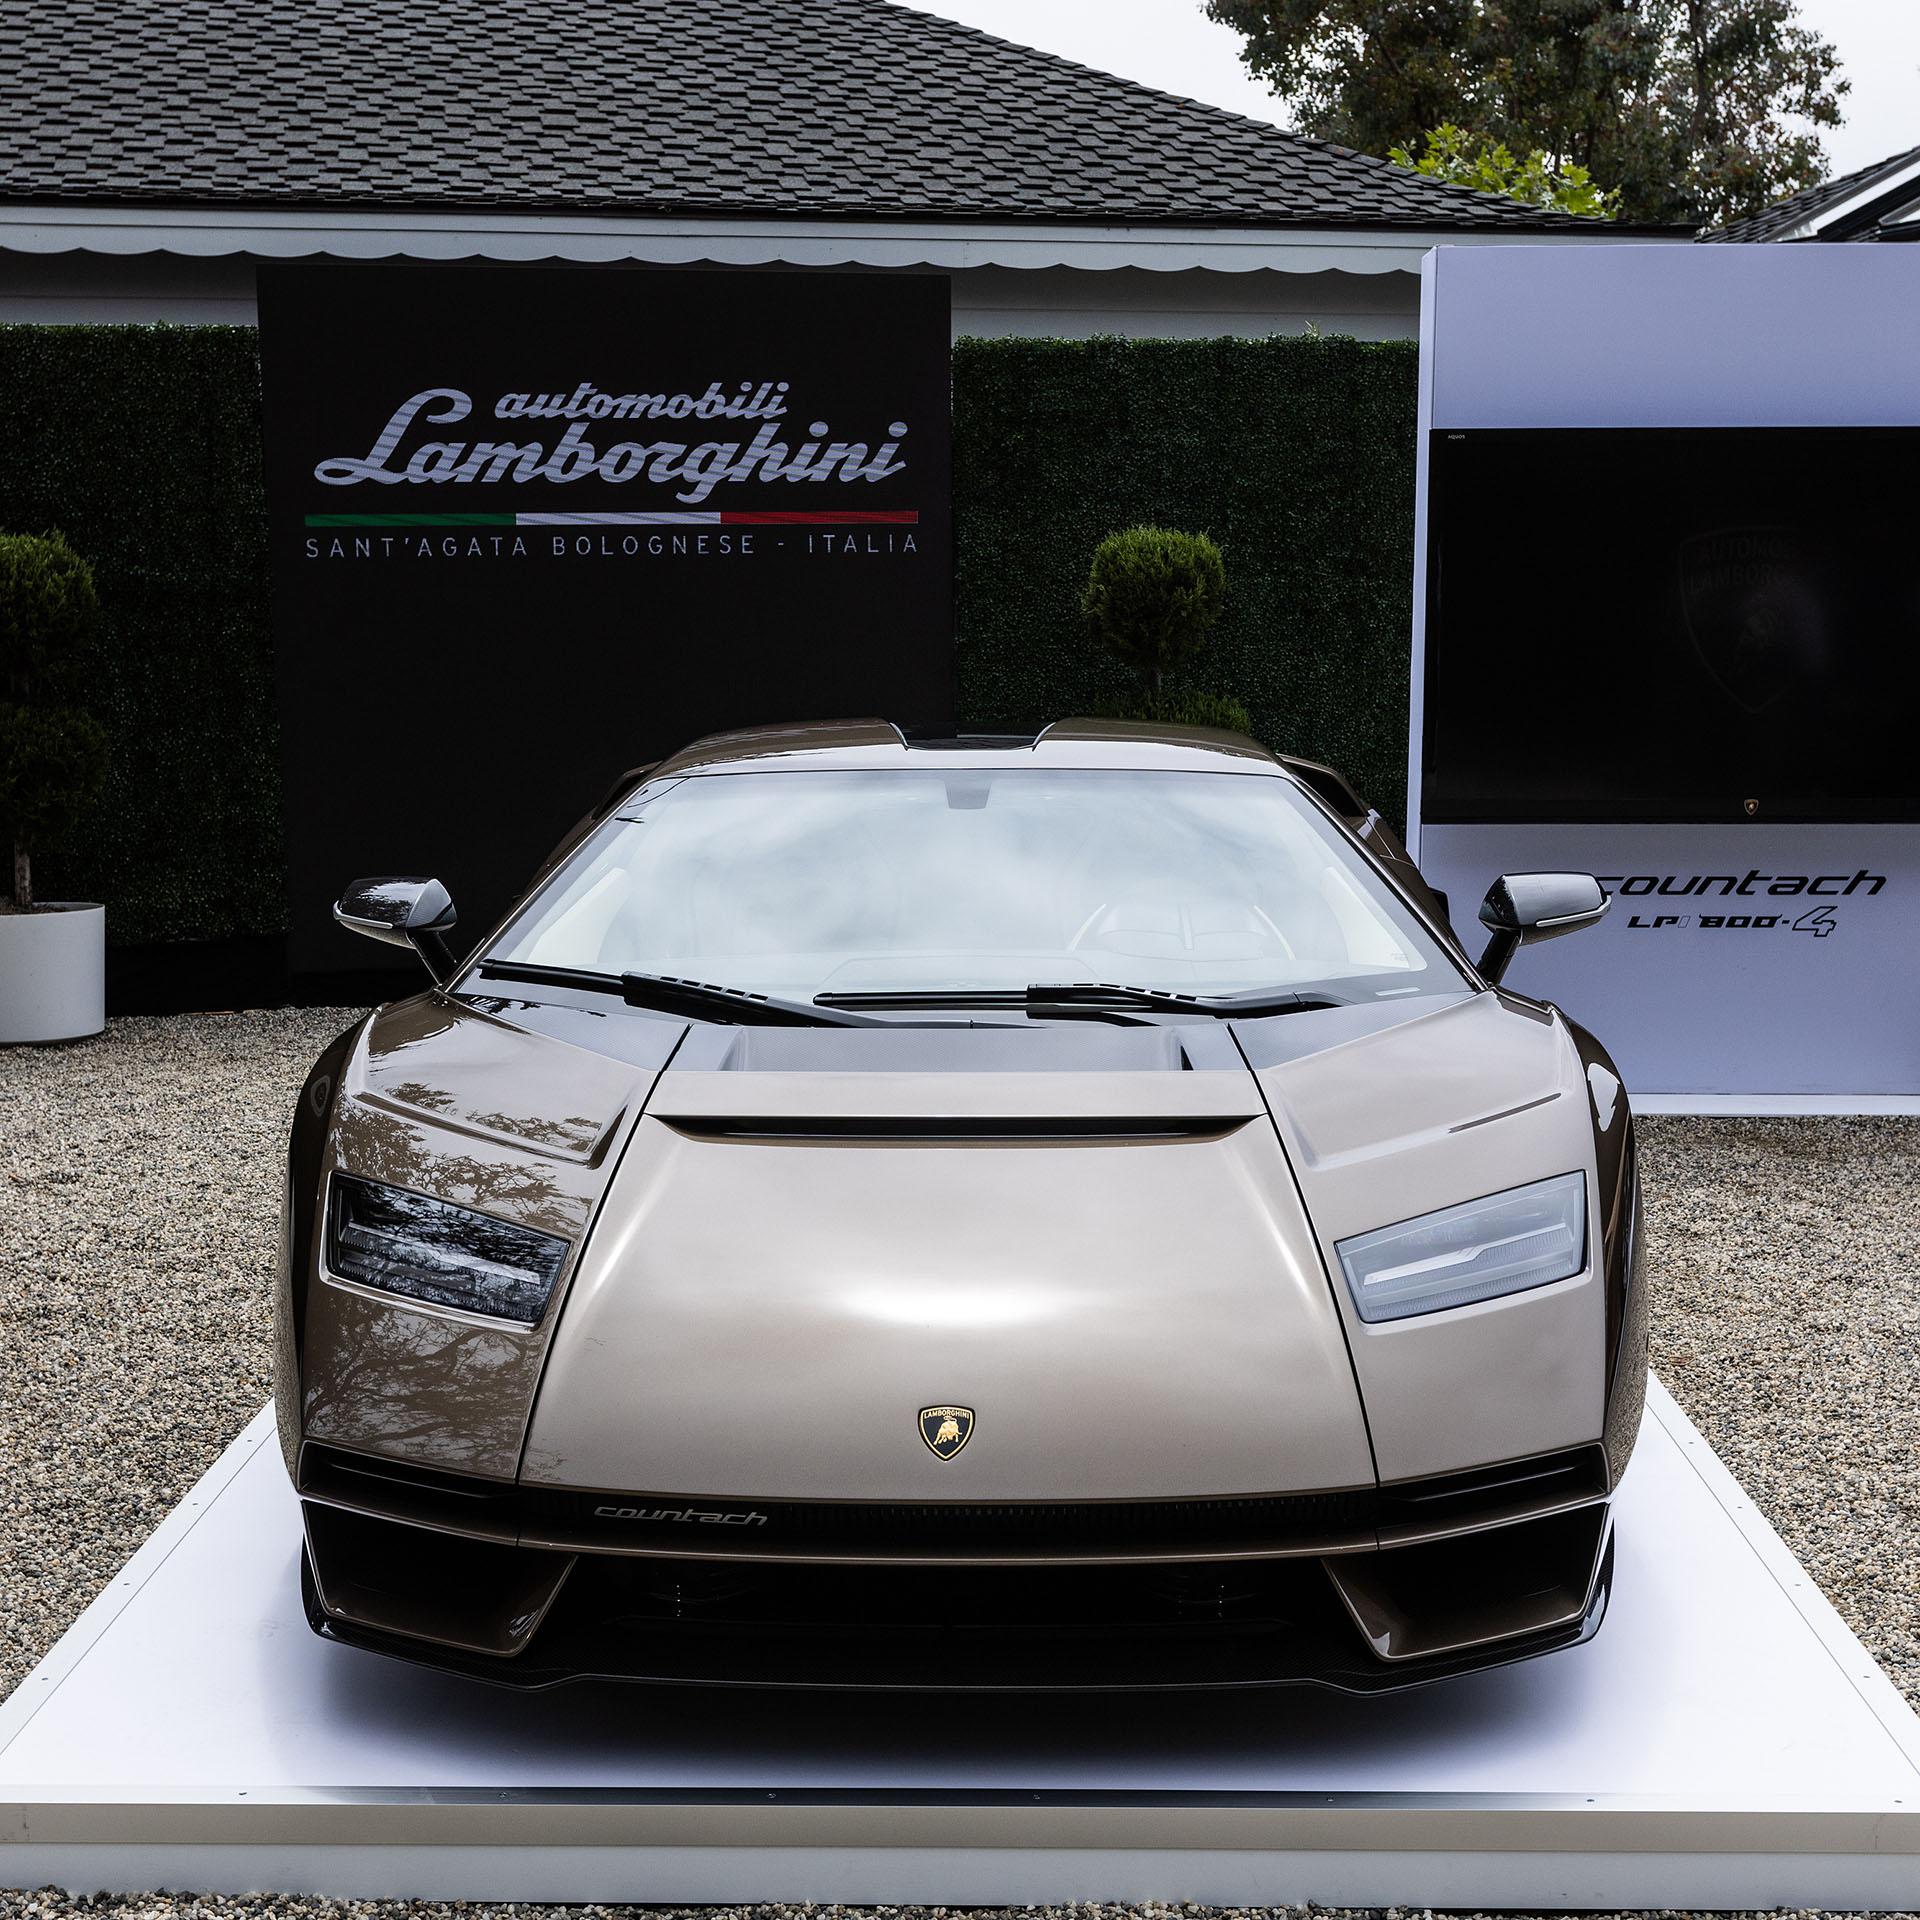 Countach lpi 800 delivered in the us 9